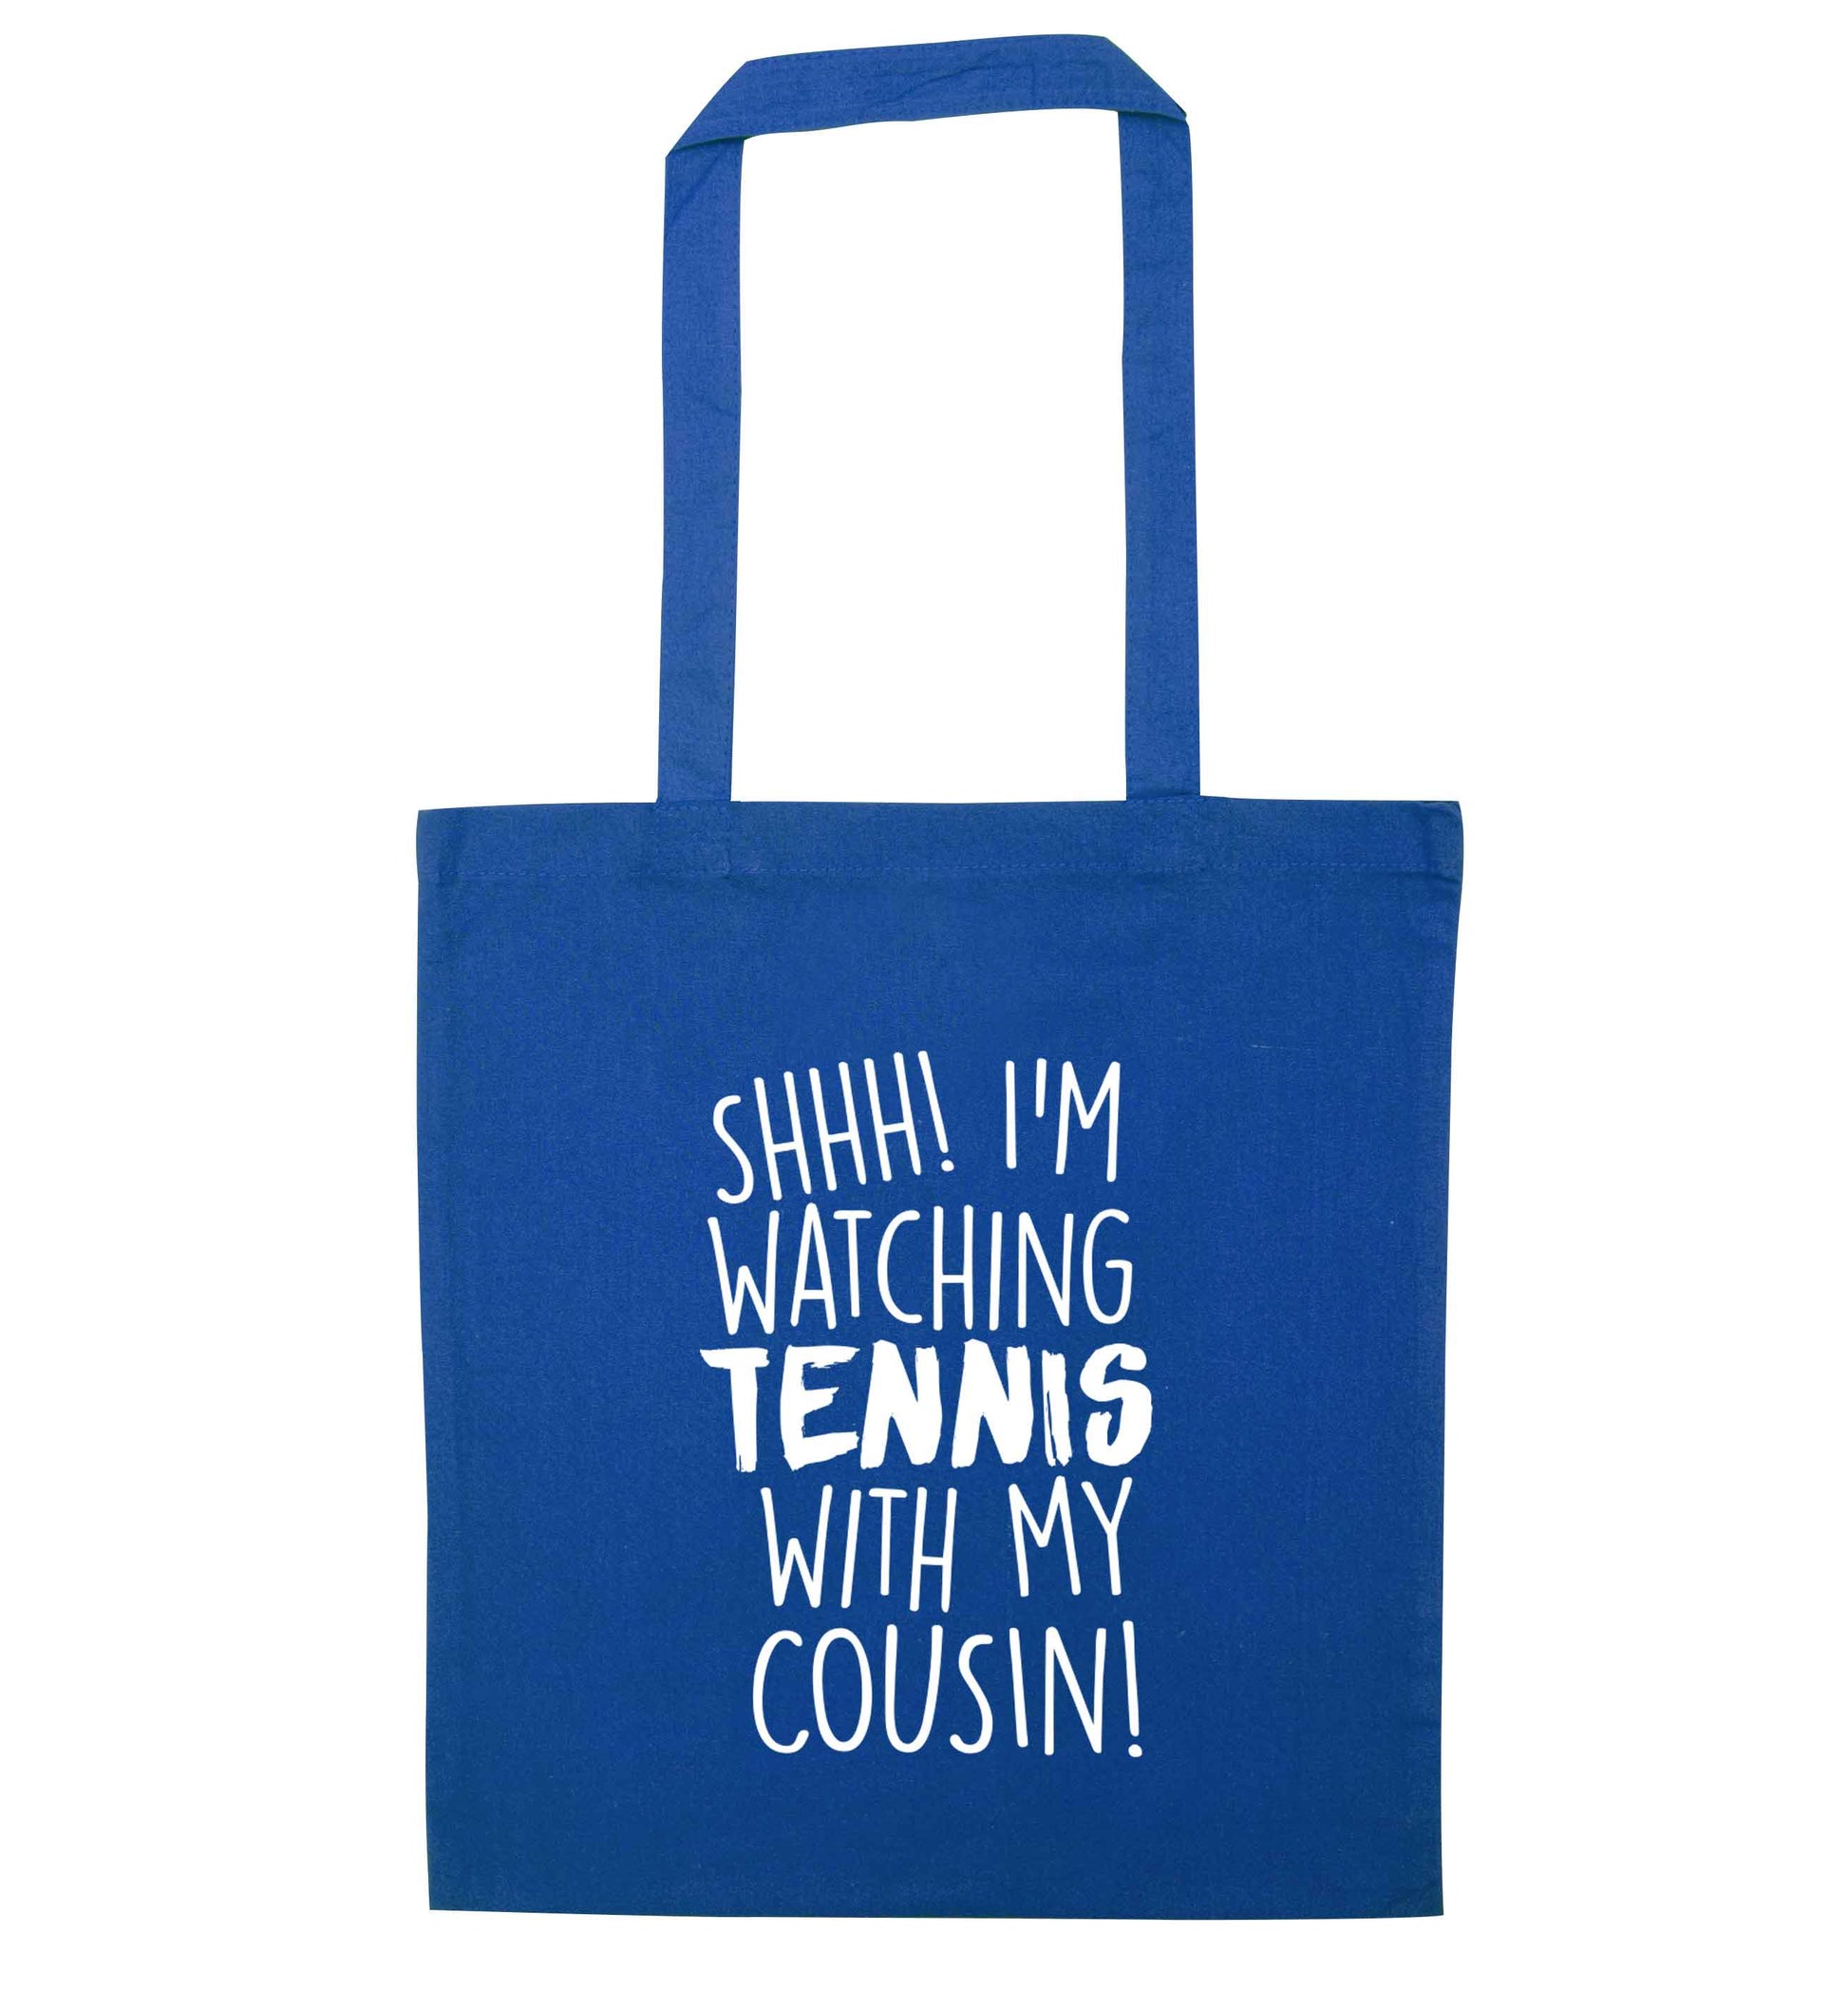 Shh! I'm watching tennis with my cousin! blue tote bag